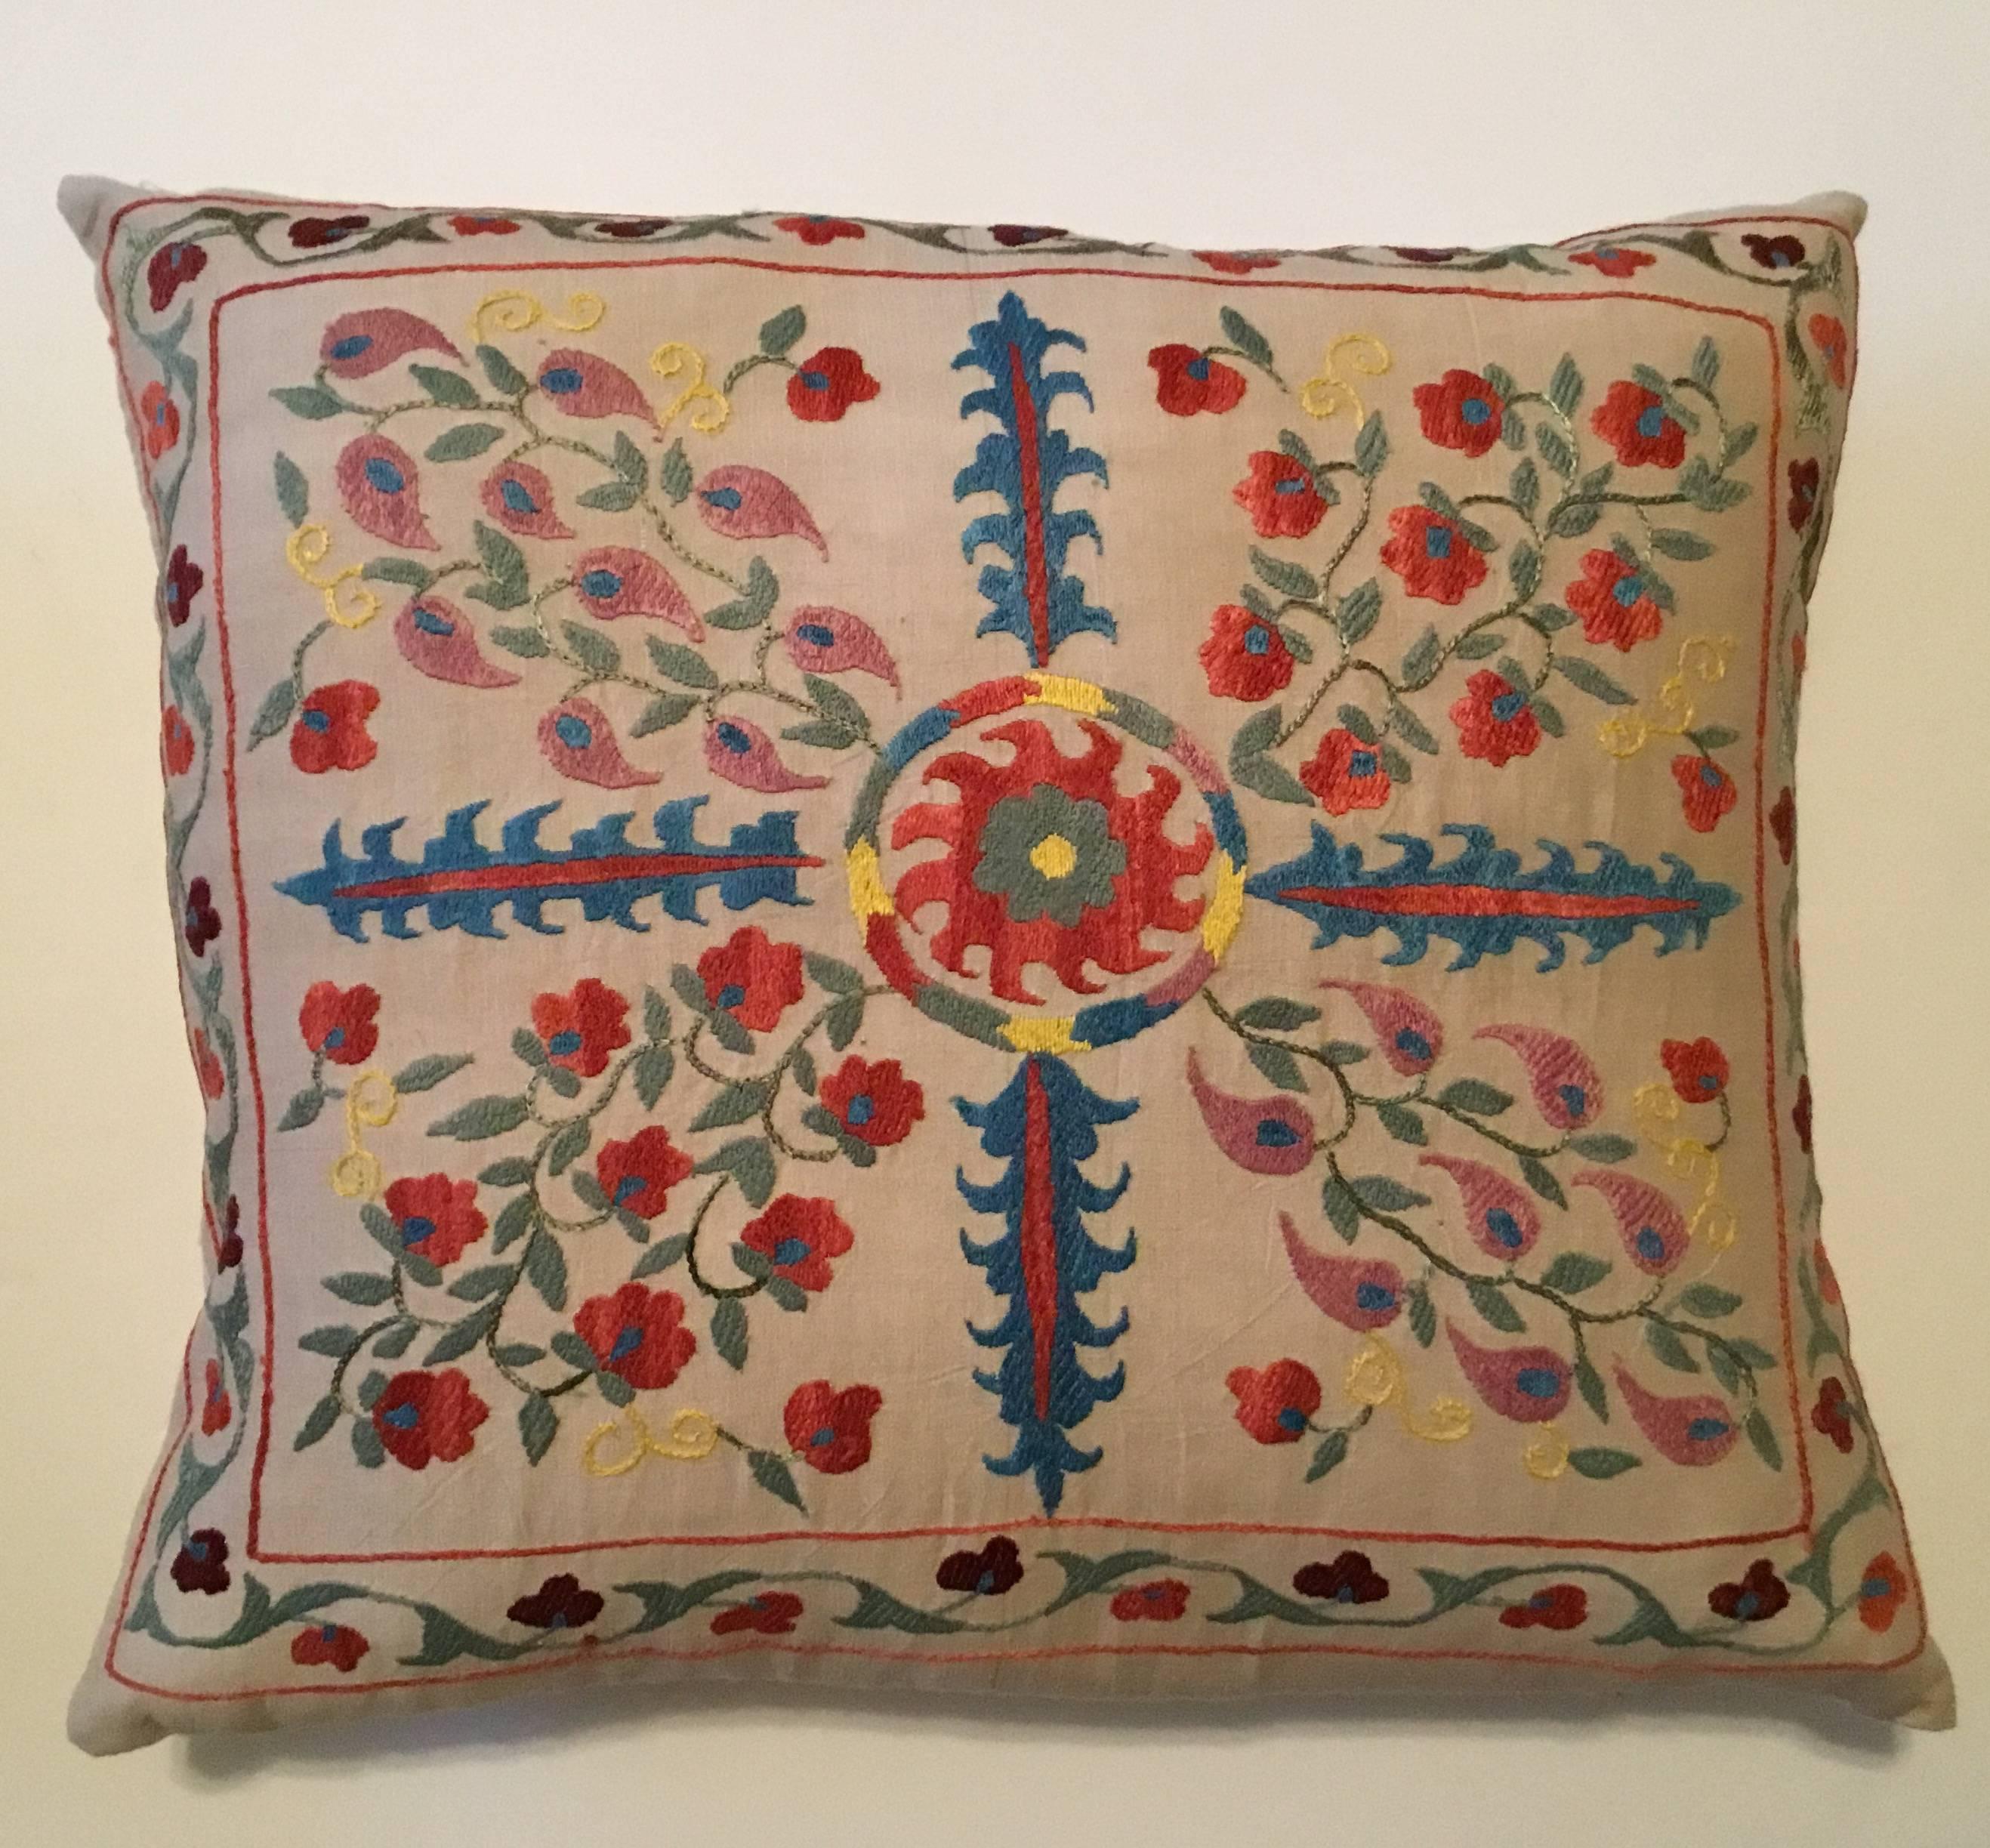 Beautiful soft colors Pillows made of hand embroidery silk on cream colors background, flower and vine motifs.
Cotton backing with zipper, down and feather inserts.
Sizes:
1. 19